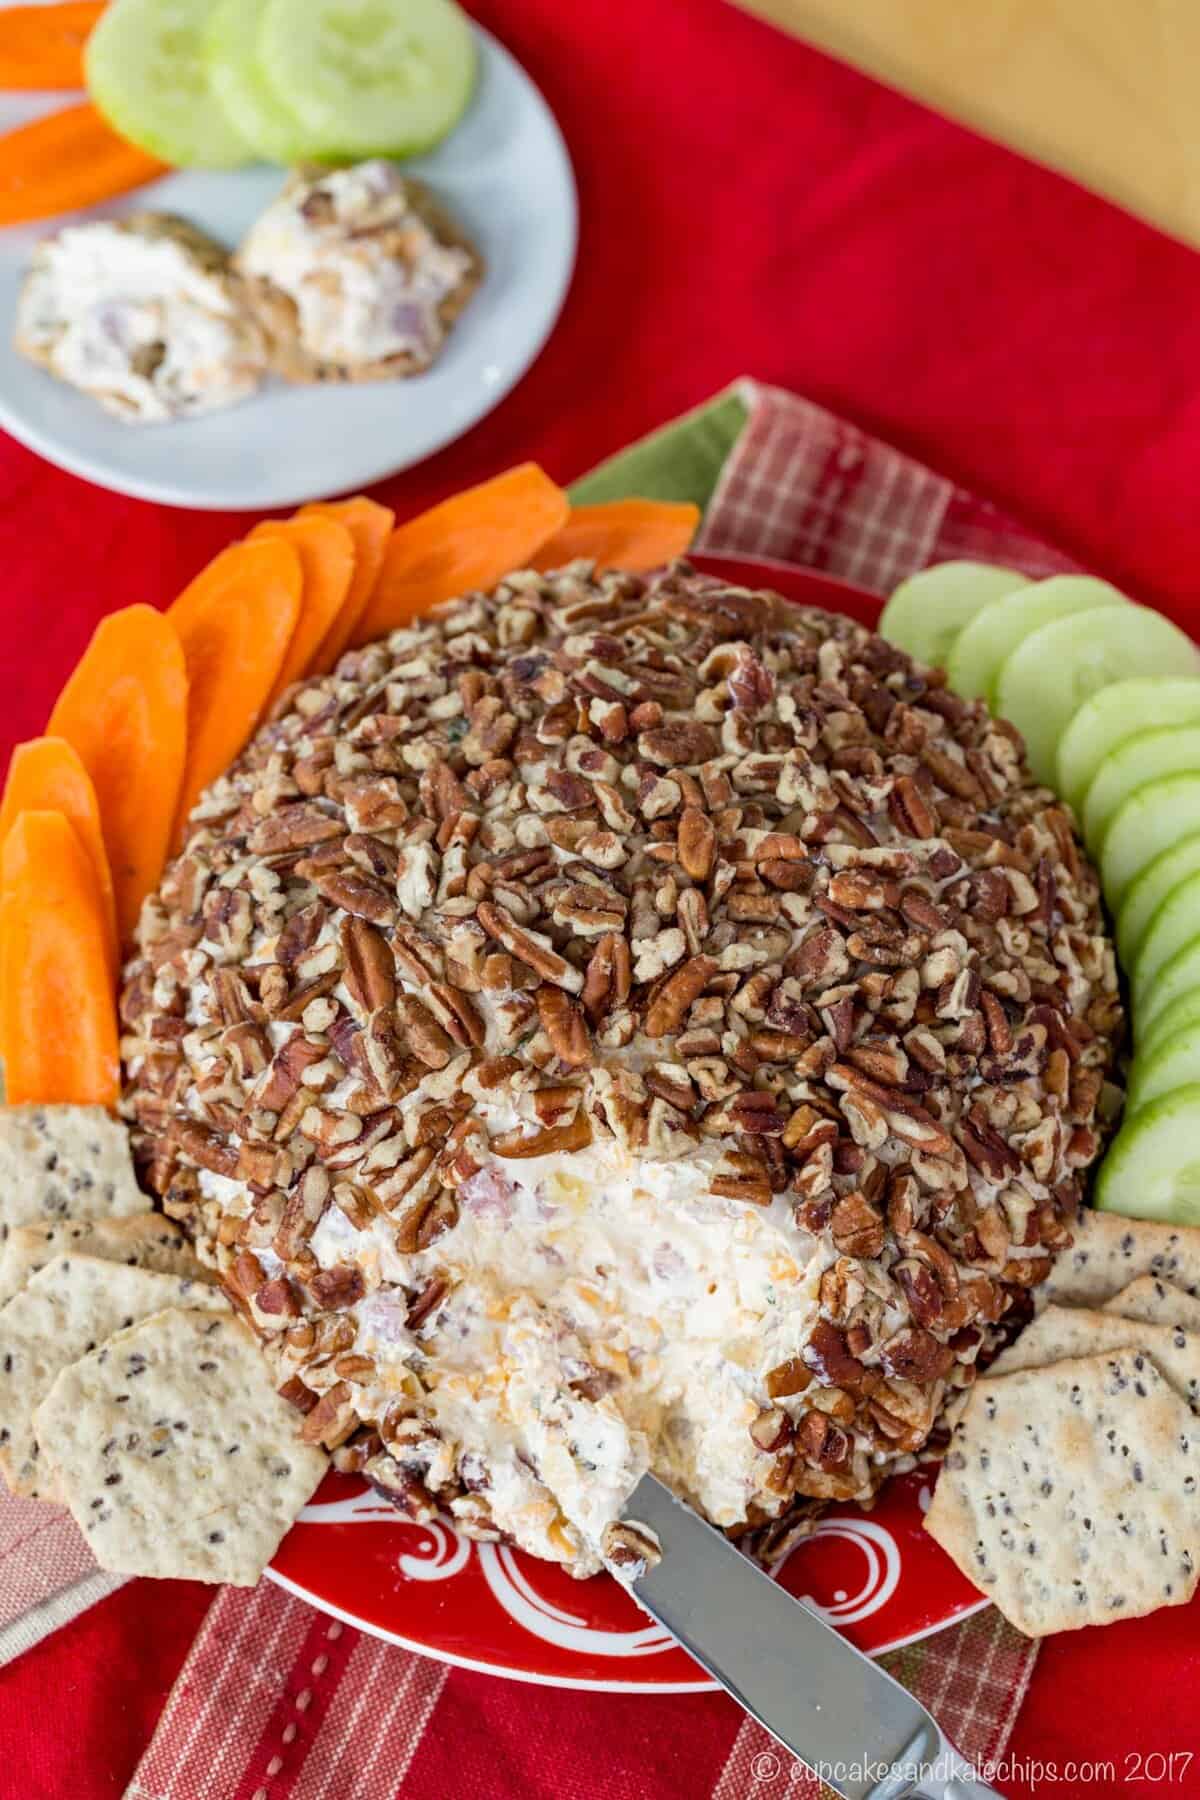 Looking down at cheeseball coated in pecans on a plate surrounded by crackers and raw vegetables with a small plate with two crackers topped with the ham and cheese spread next to it.